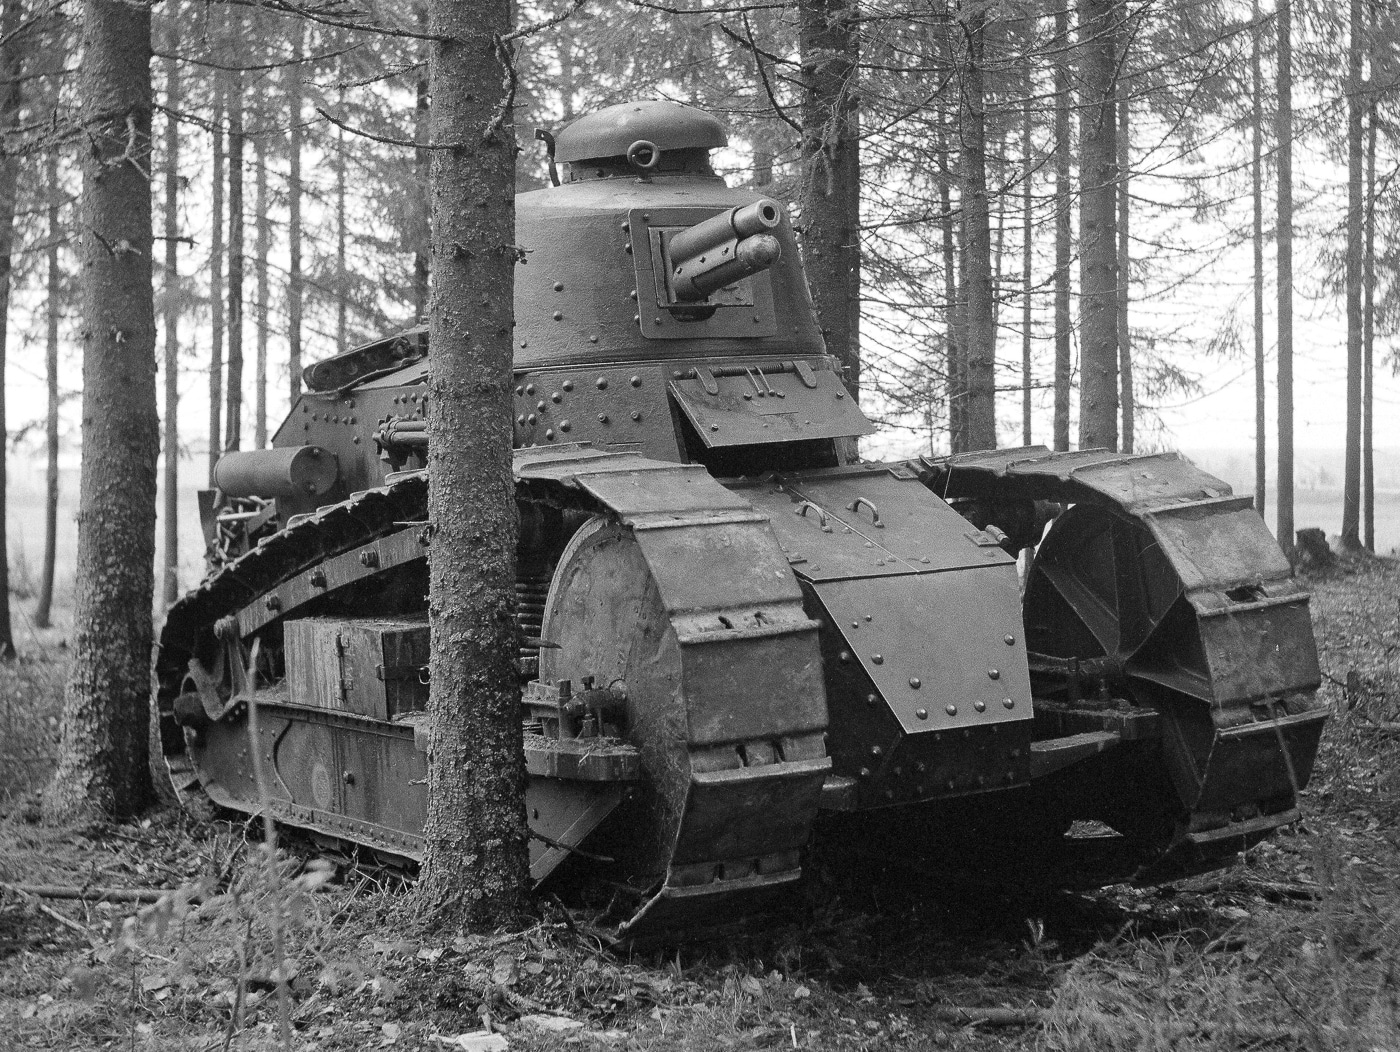 Renault FT 17 with 37mm Puteaux cannon in Finland